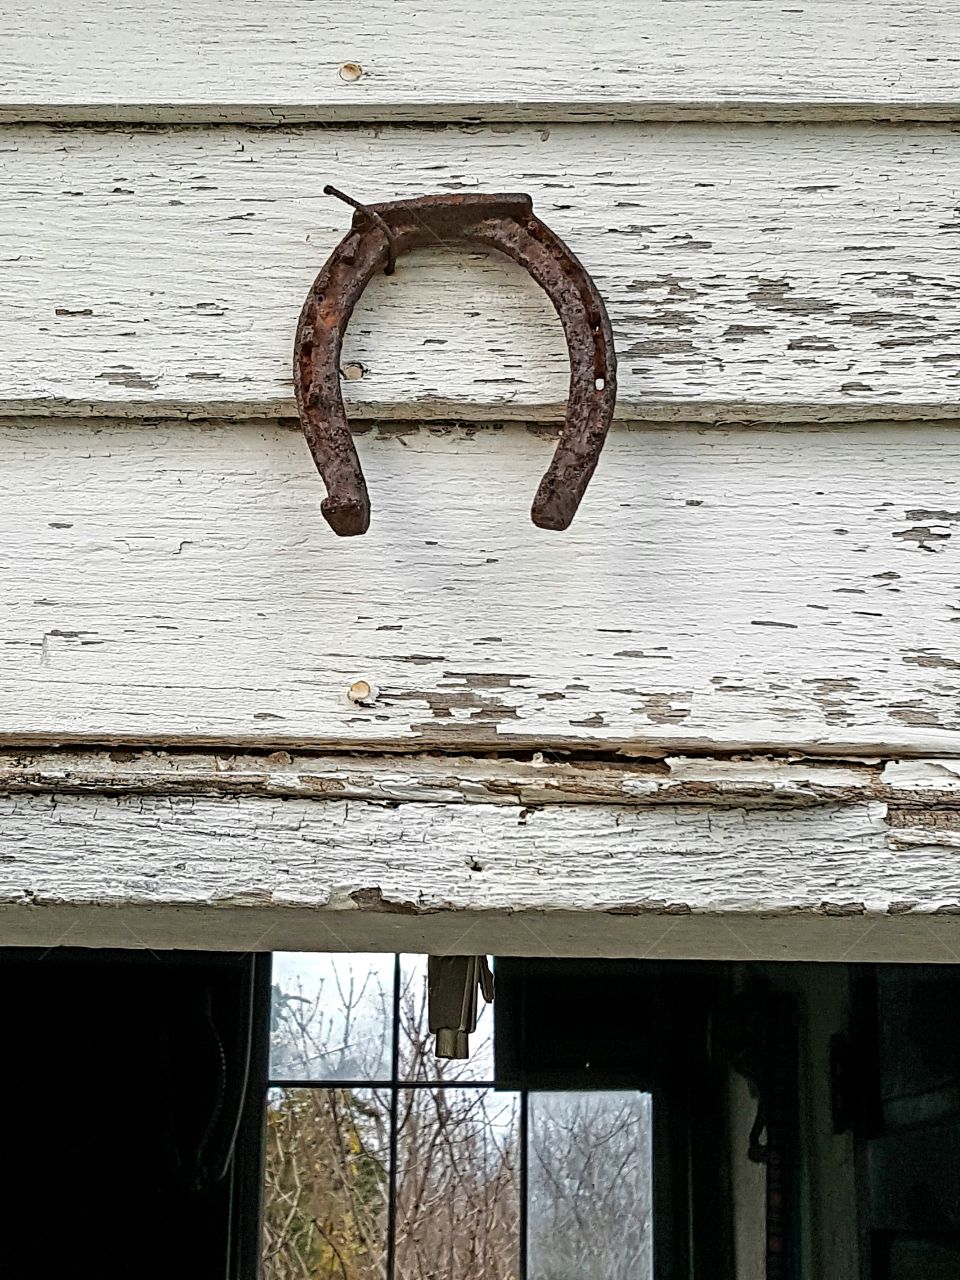 Although our family believe in blessings instead of luck, there's something extremely country about having a horseshoe hanging above the door. This one is above our smokehouse.